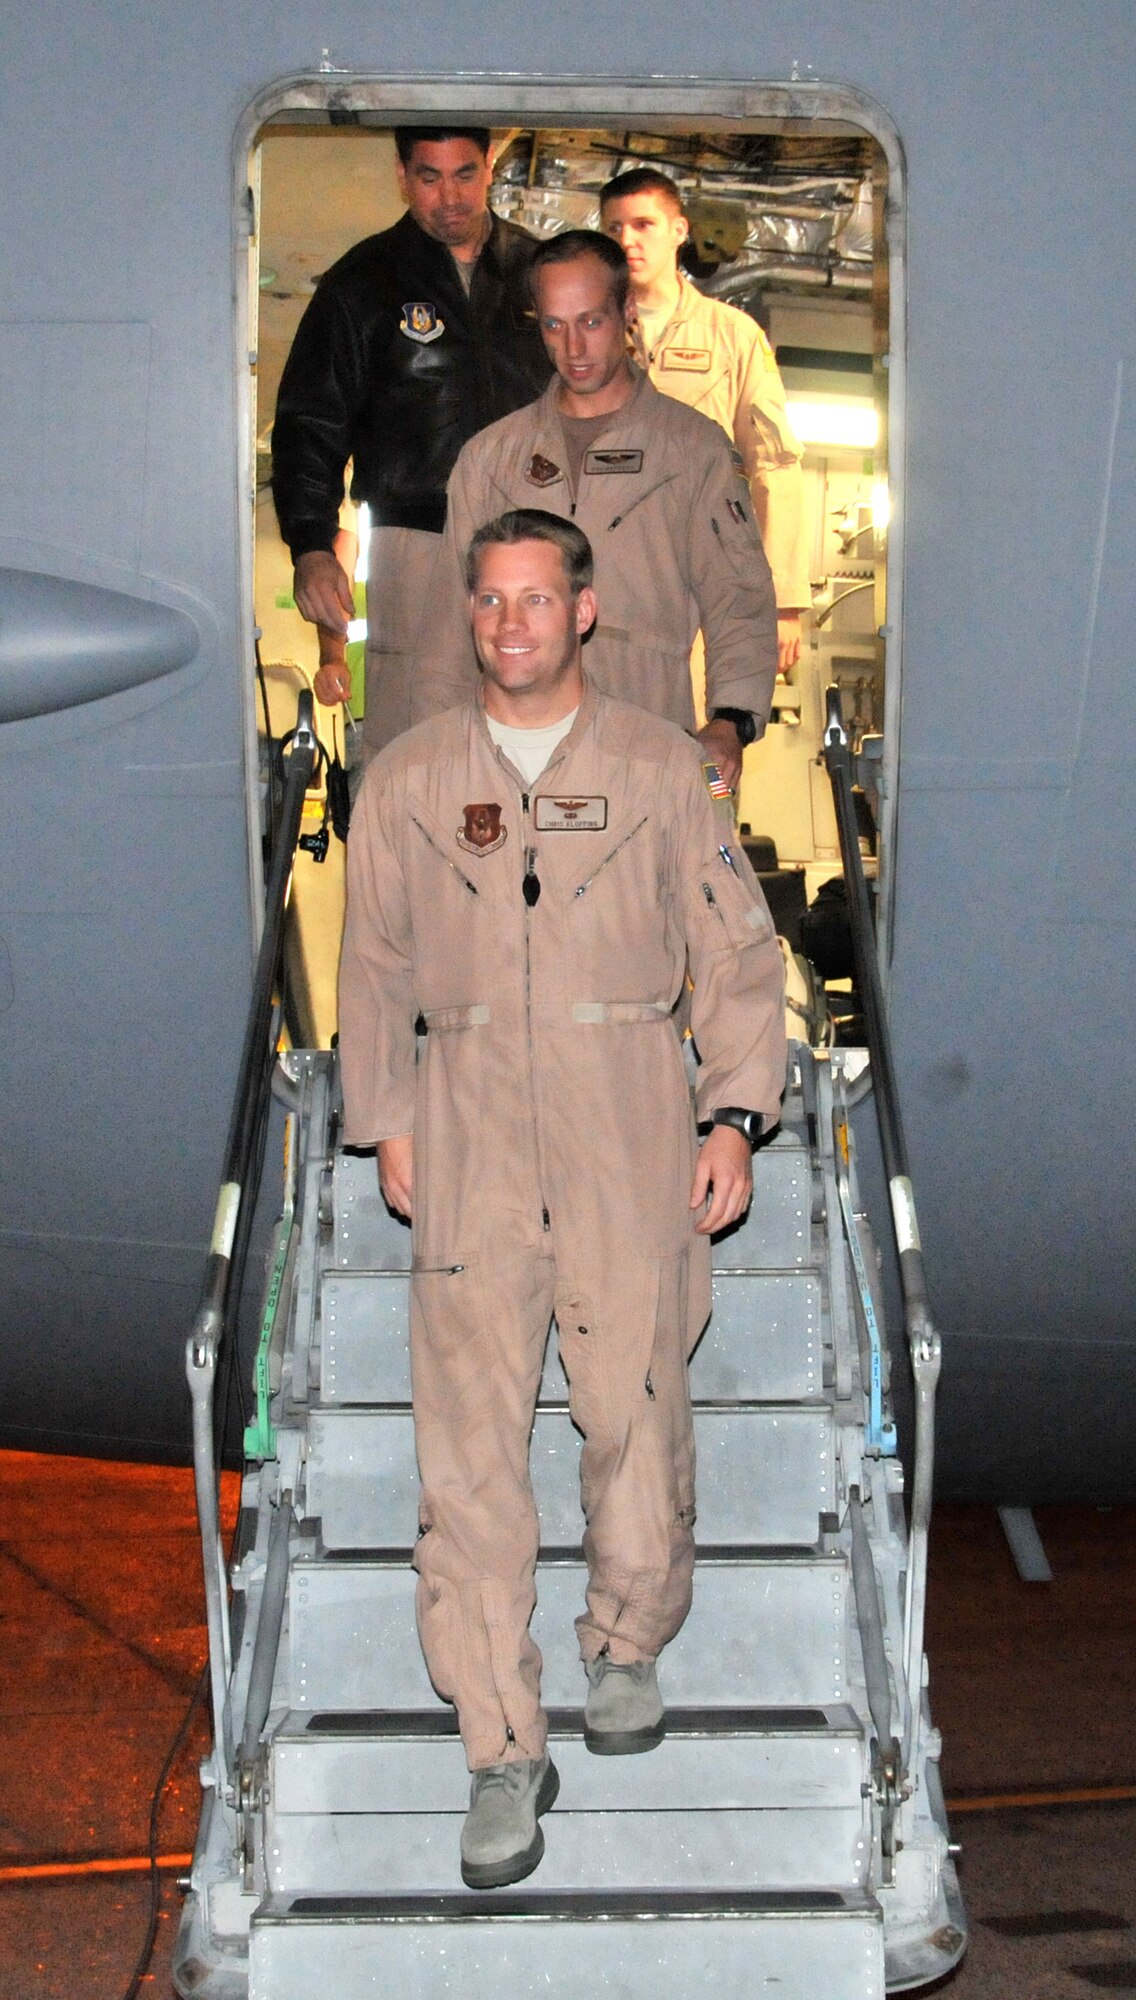 U.S. Air Force Maj. Chris Klopping (on steps), 97th Airlift Squadron instructor pilot out of McChord Field, Wash., gives his "mission accomplished" smile after he, and his fellow Reserve aircrew members, came back from transporting U.S. Secretary of State
Hillary Rodham Clinton to Tripoli, Libya, where she visited to pledge millions of dollars in new aid earlier this week. The C-17 Globemaster III crew arrived here at McChord Field, Oct. 20, 2011. An active-duty crewmember from the 62nd Airlift Wing and a Raven unit from the 627th Air Base Group also supported the mission. (U.S. Air Force photo by 2nd Lt. Lori Fiorello)
